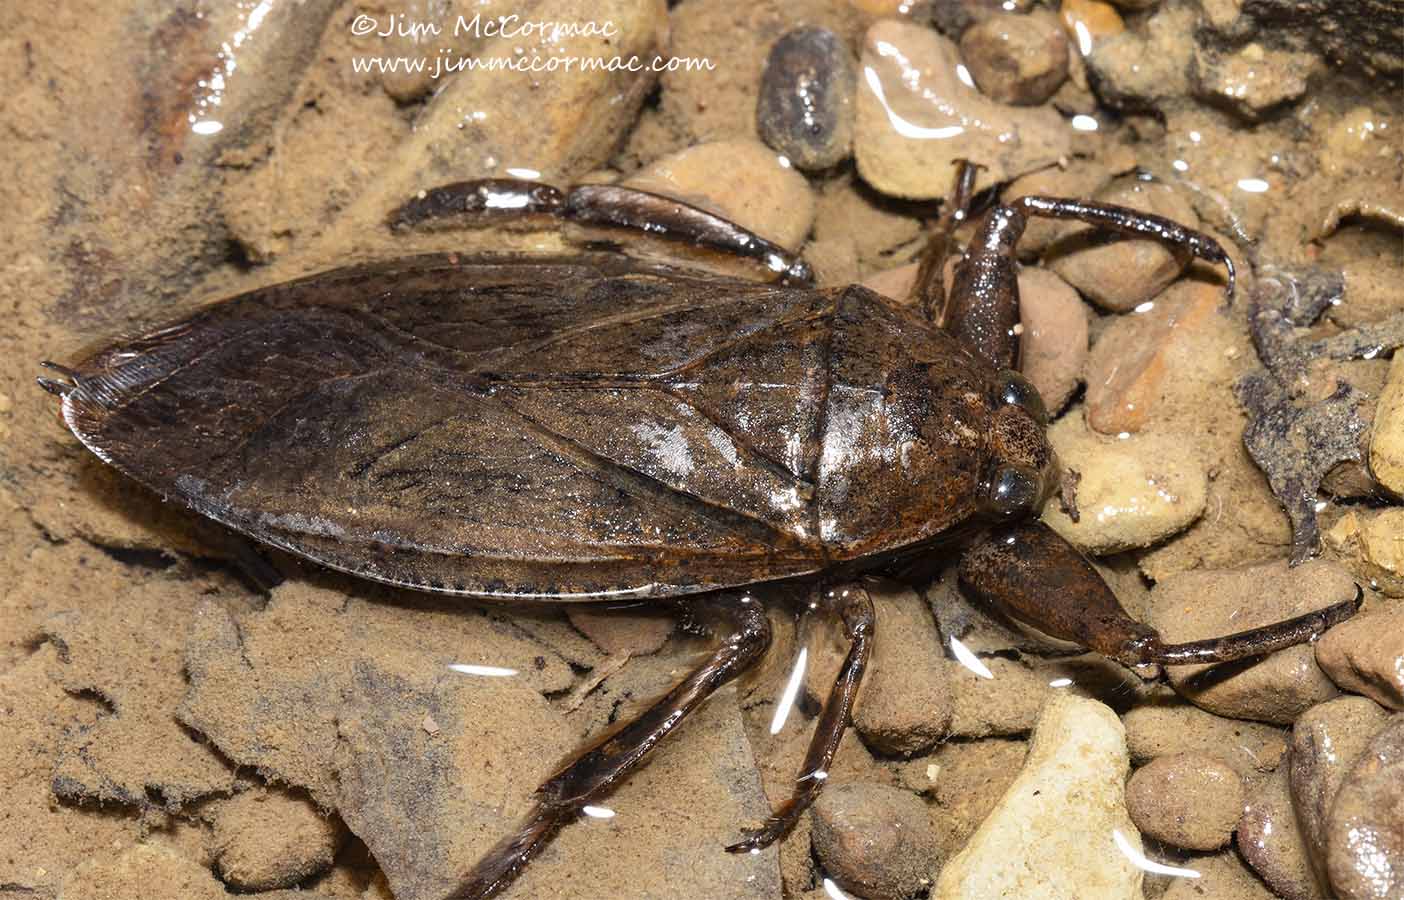 giant water bug nymph